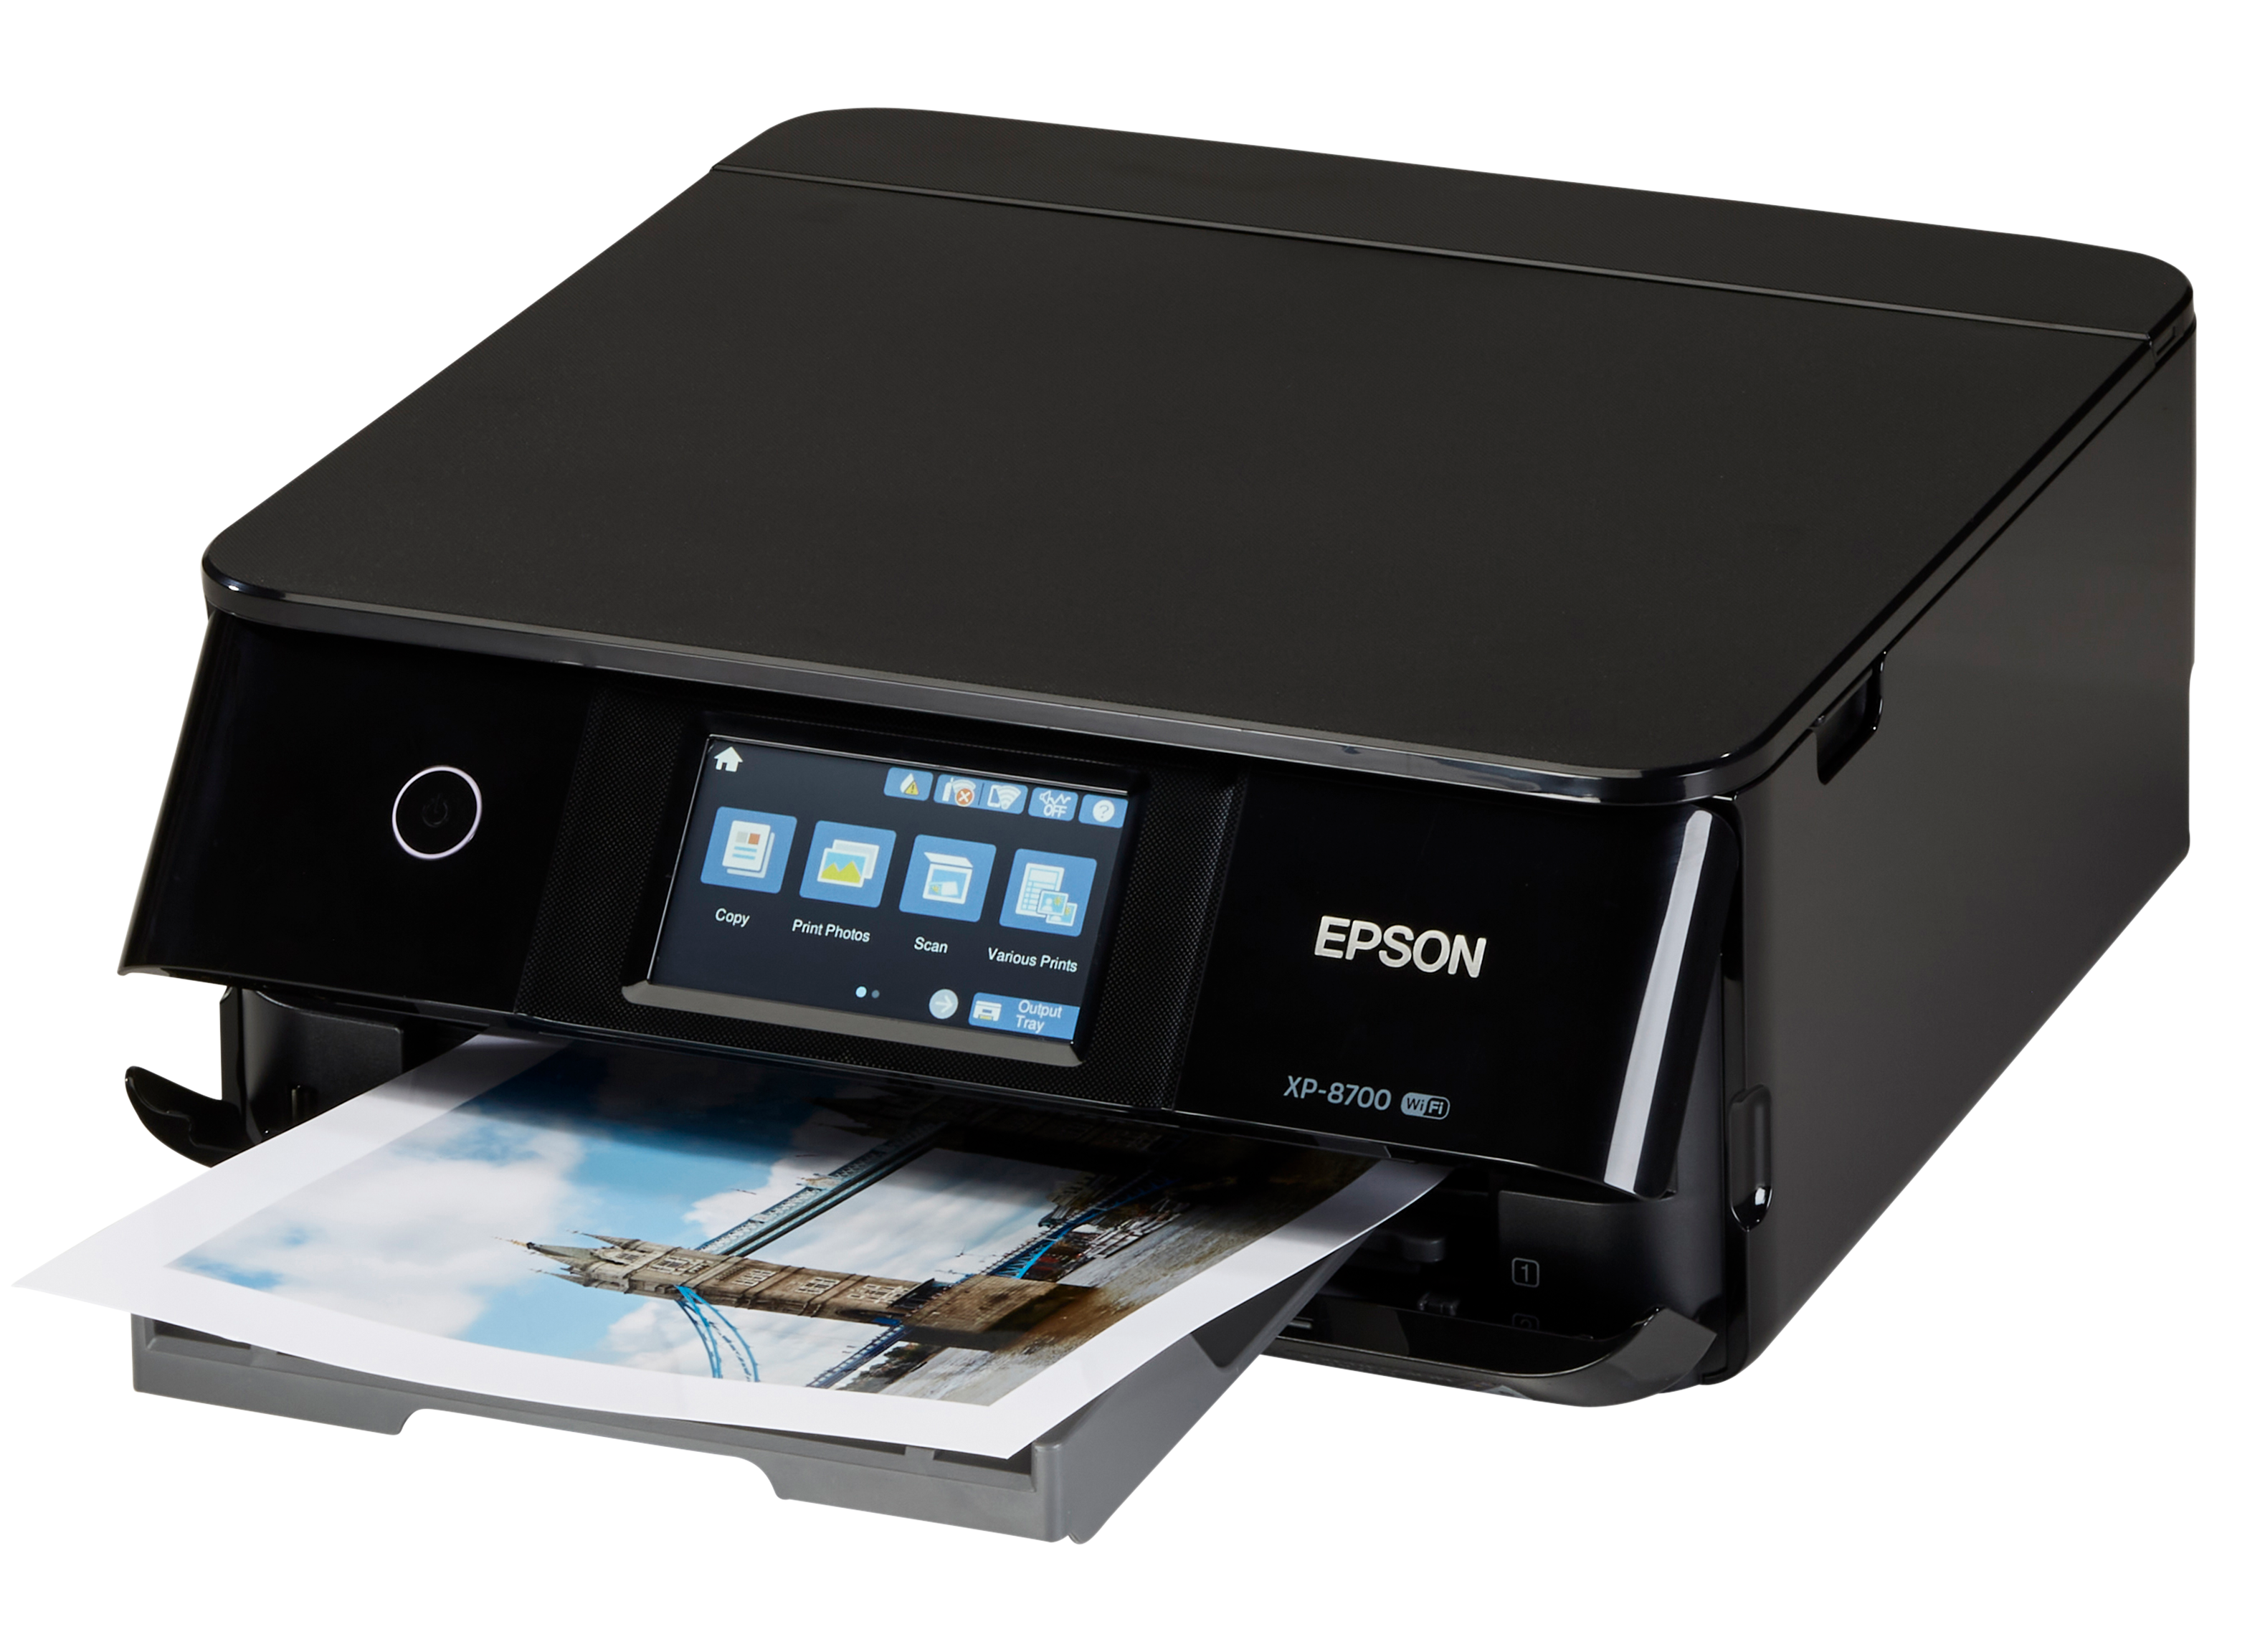 Epson Expression Photo XP-8700 Printer Review - Consumer Reports